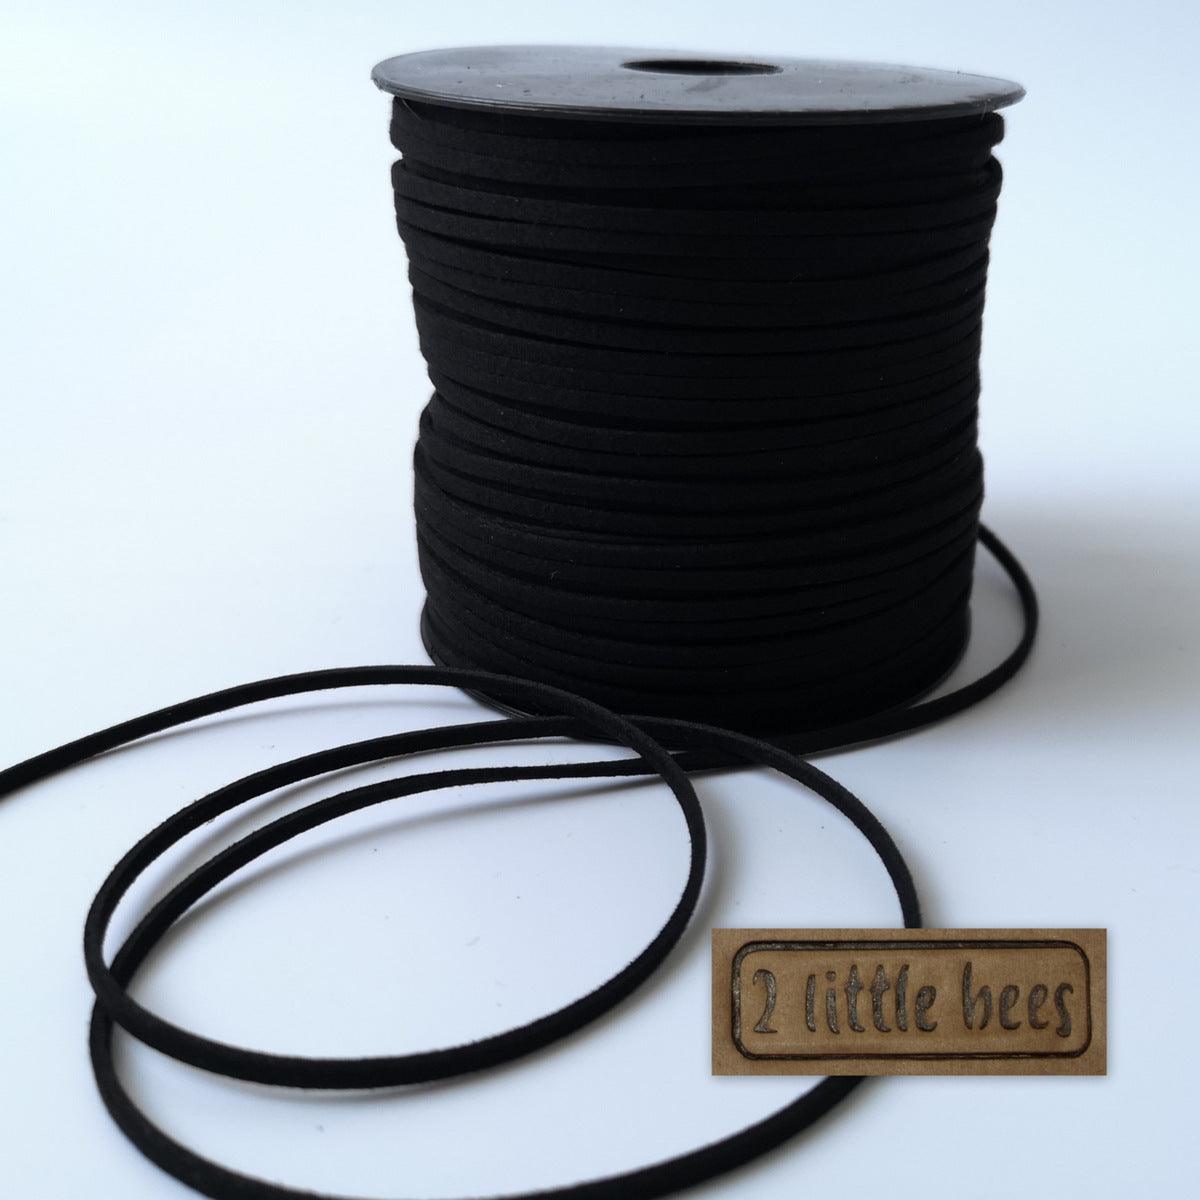 Flat Faux Suede Leather String. Black – 2 little bees